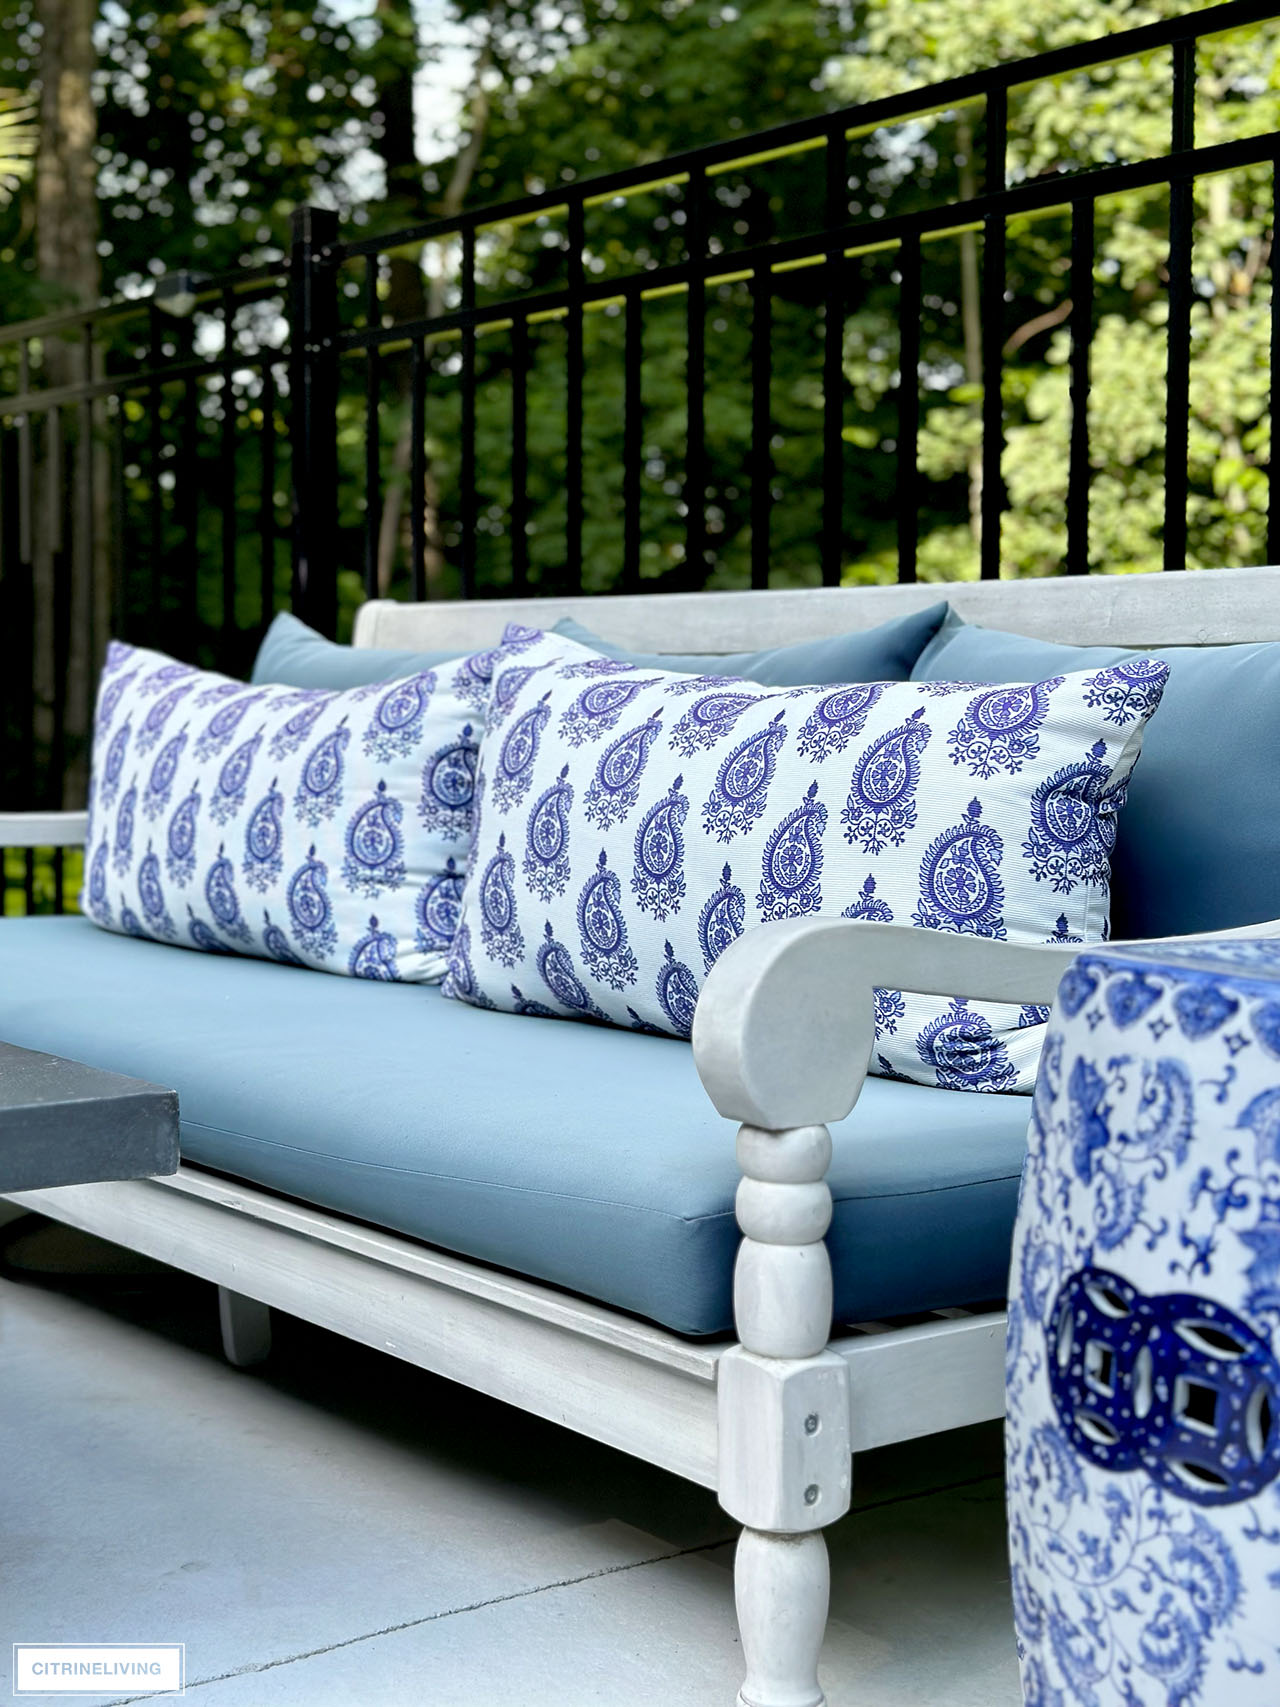 Outdoor daybed with lumbar pillows in batik print.